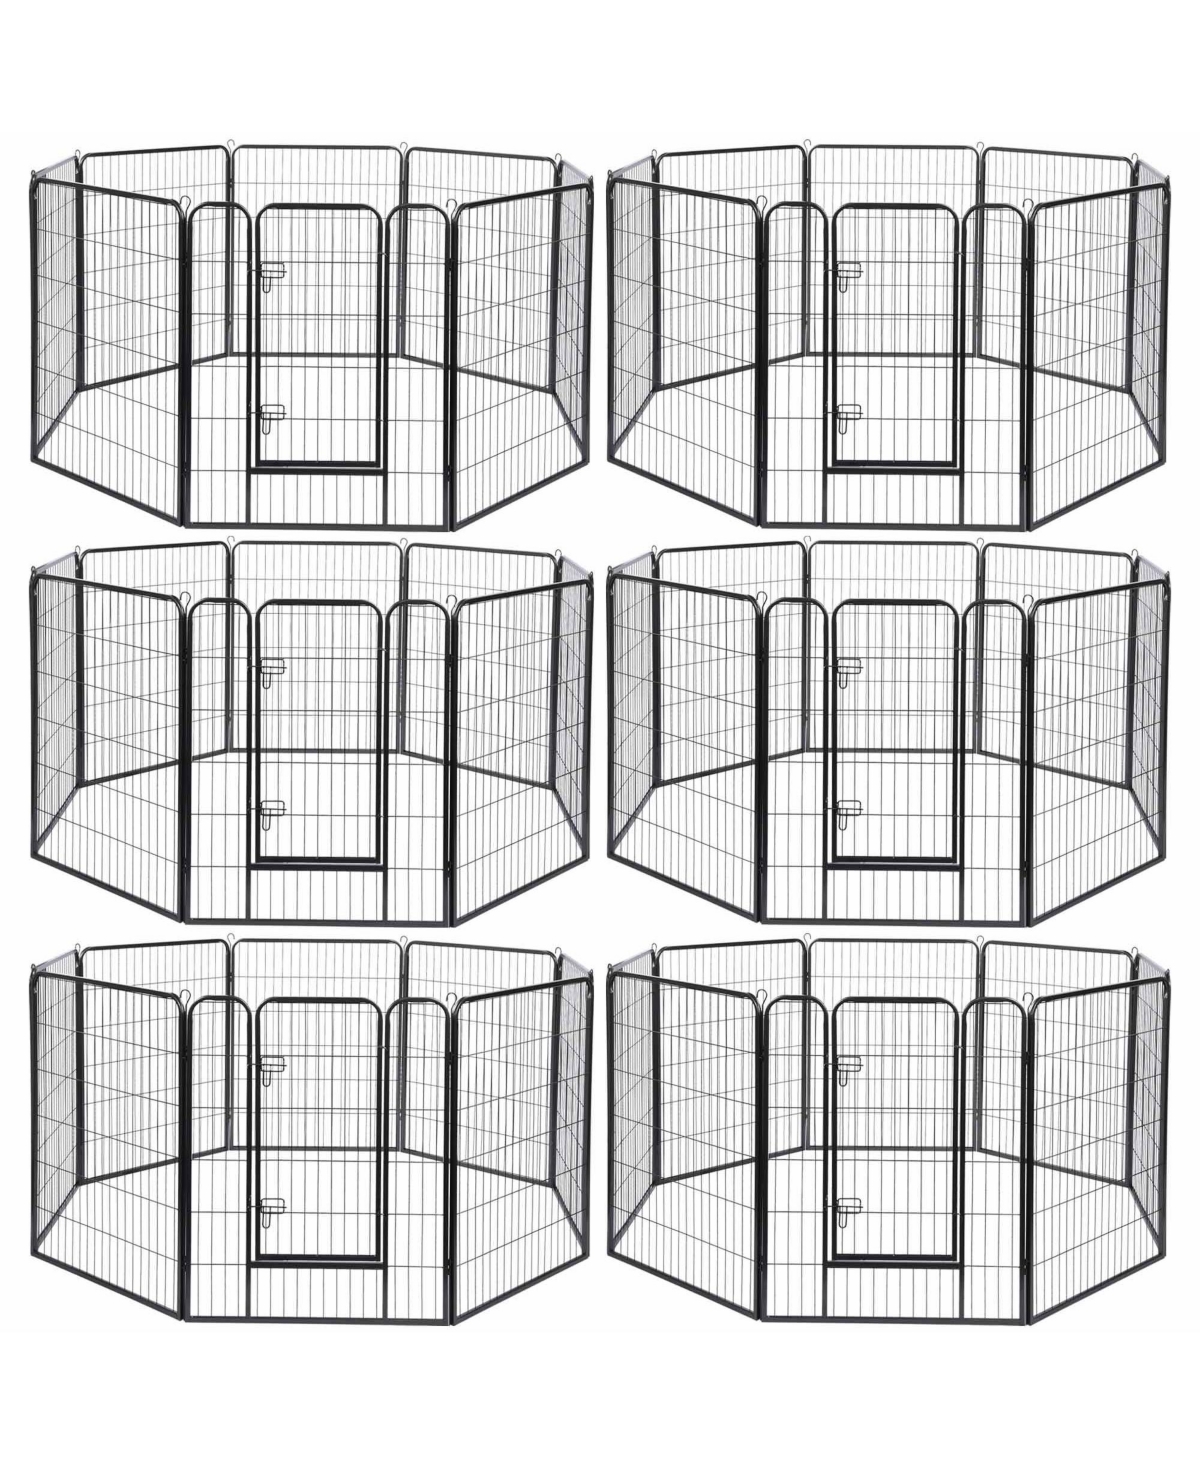 48 Pieces 31"x39" Pet Playpen Extra Large Dog Exercise Fence Panel Crate Yard - Black